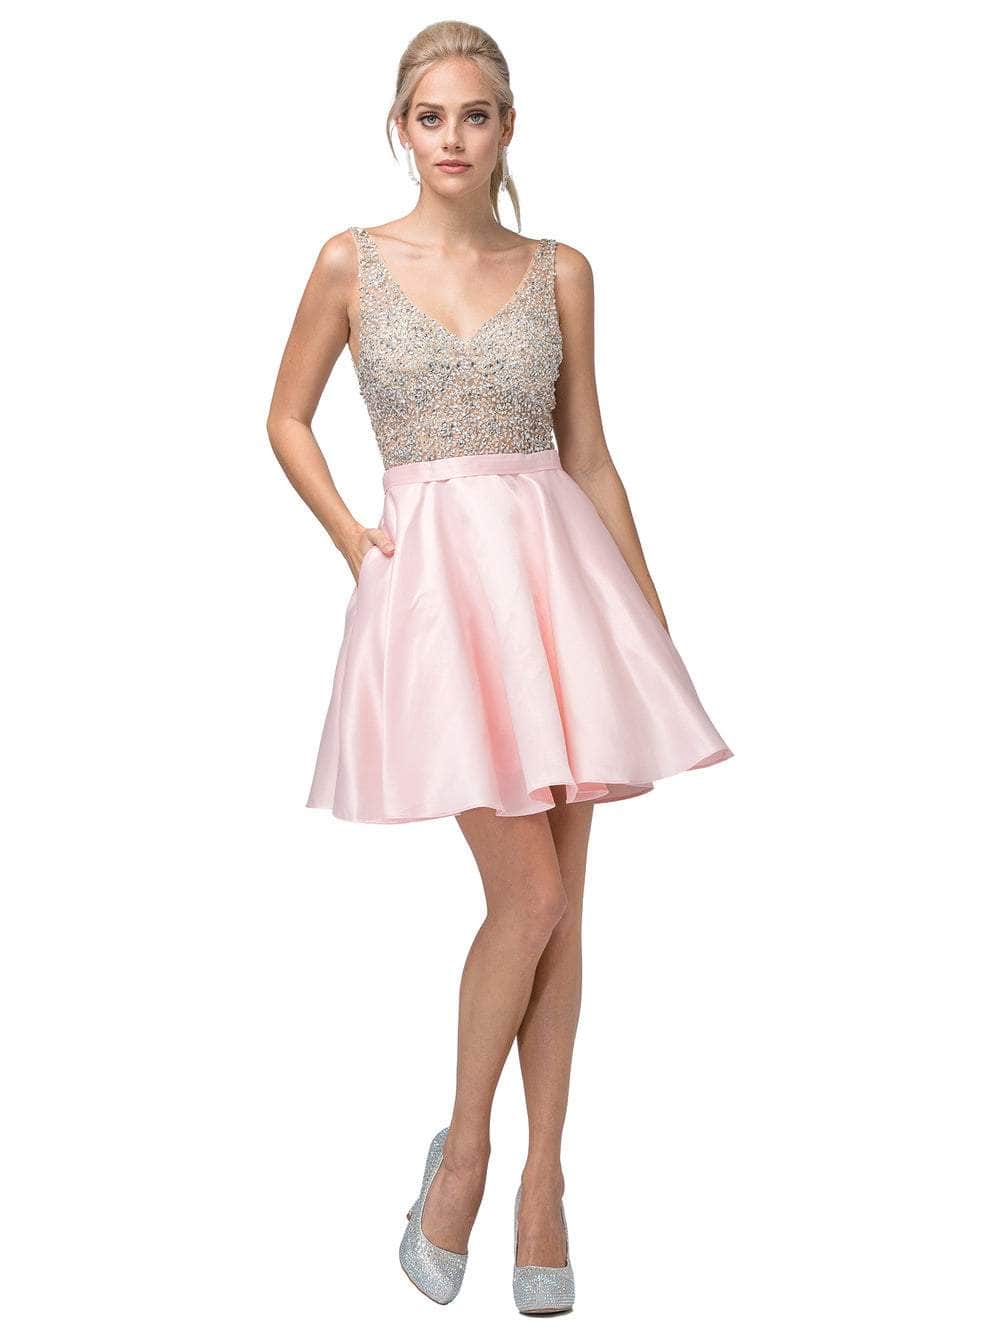 Dancing Queen - 3092 Bejeweled V-neck A-line Homecoming Dress
